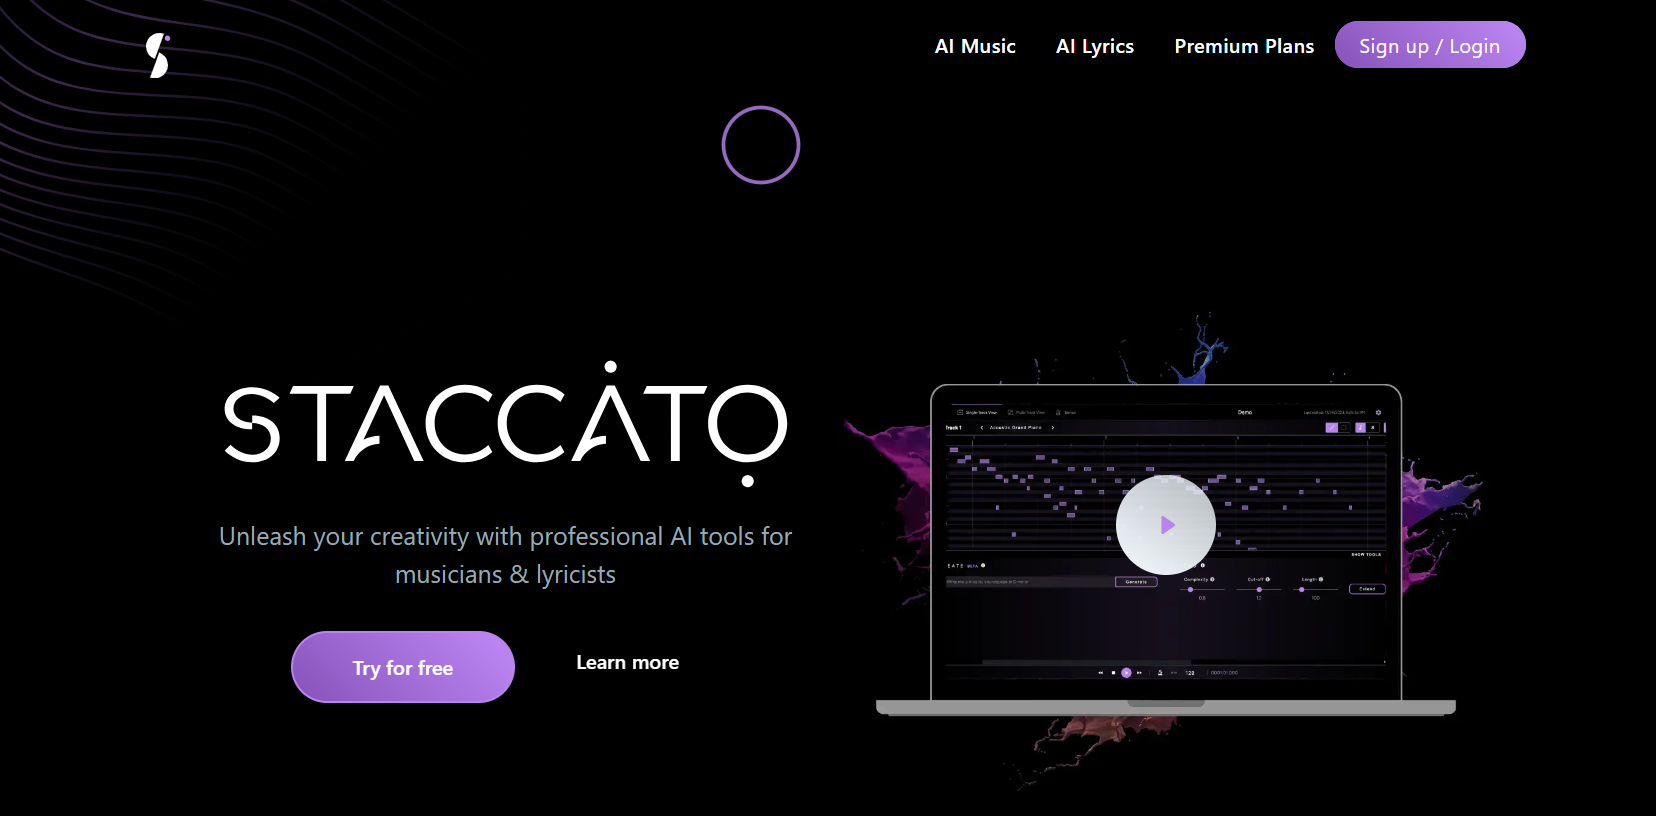 Staccato homepage with white writing and purple buttons on a black background.